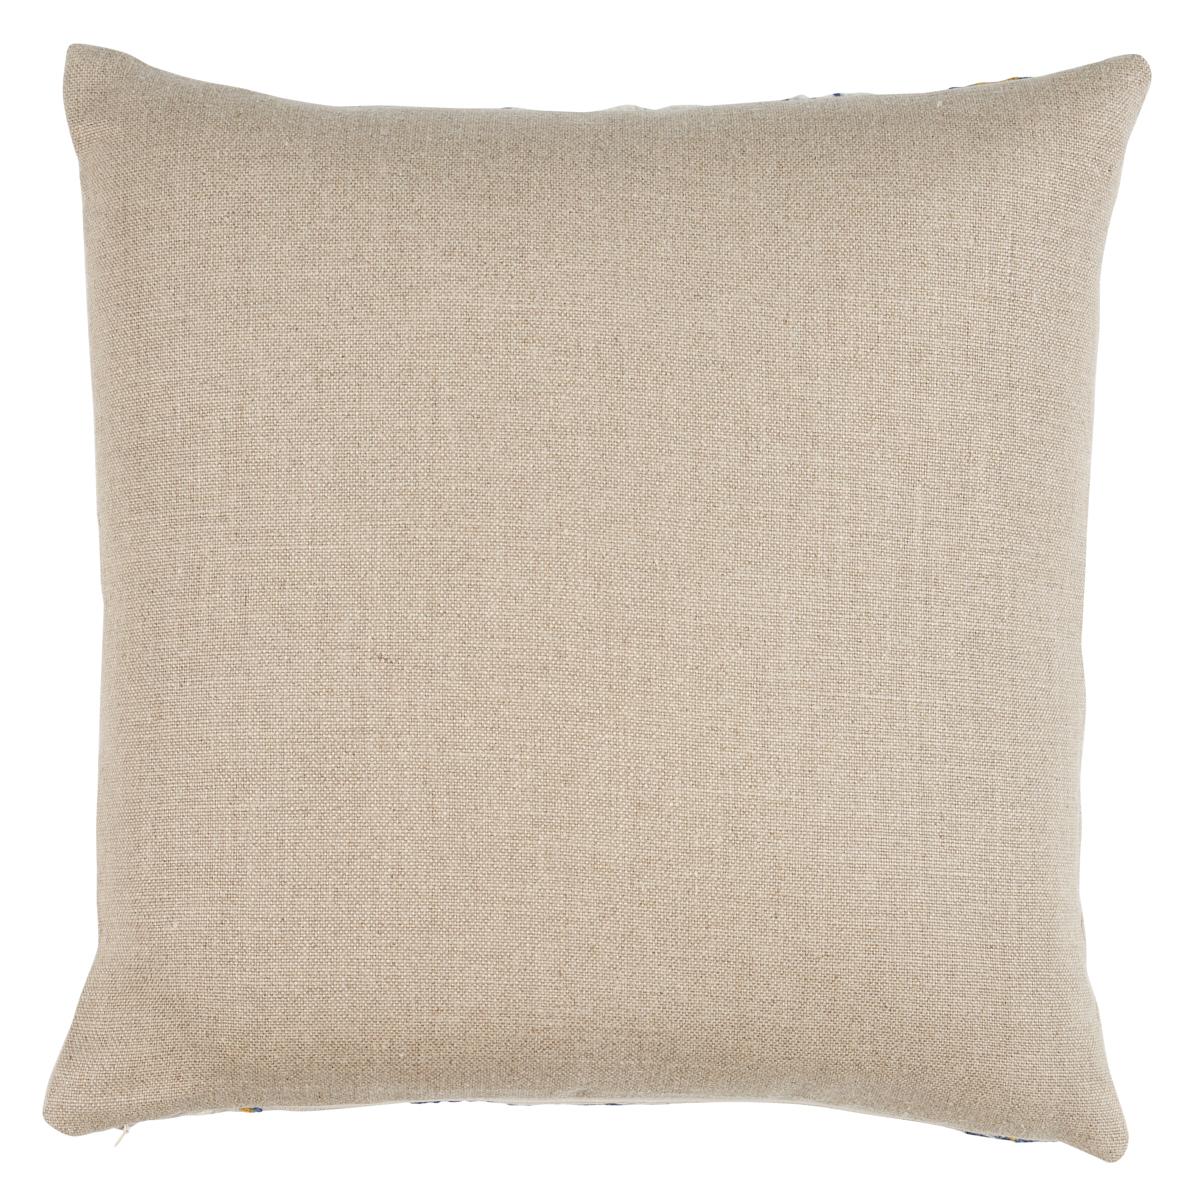 This pillow features Marguerite Embroidery with a knife edge finish. Happy and humble, Marguerite Embroidery features a hand-stitched floral design on a linen ground. Subtle irregularities in the wool yarns create dimension and quaint charm. Back of